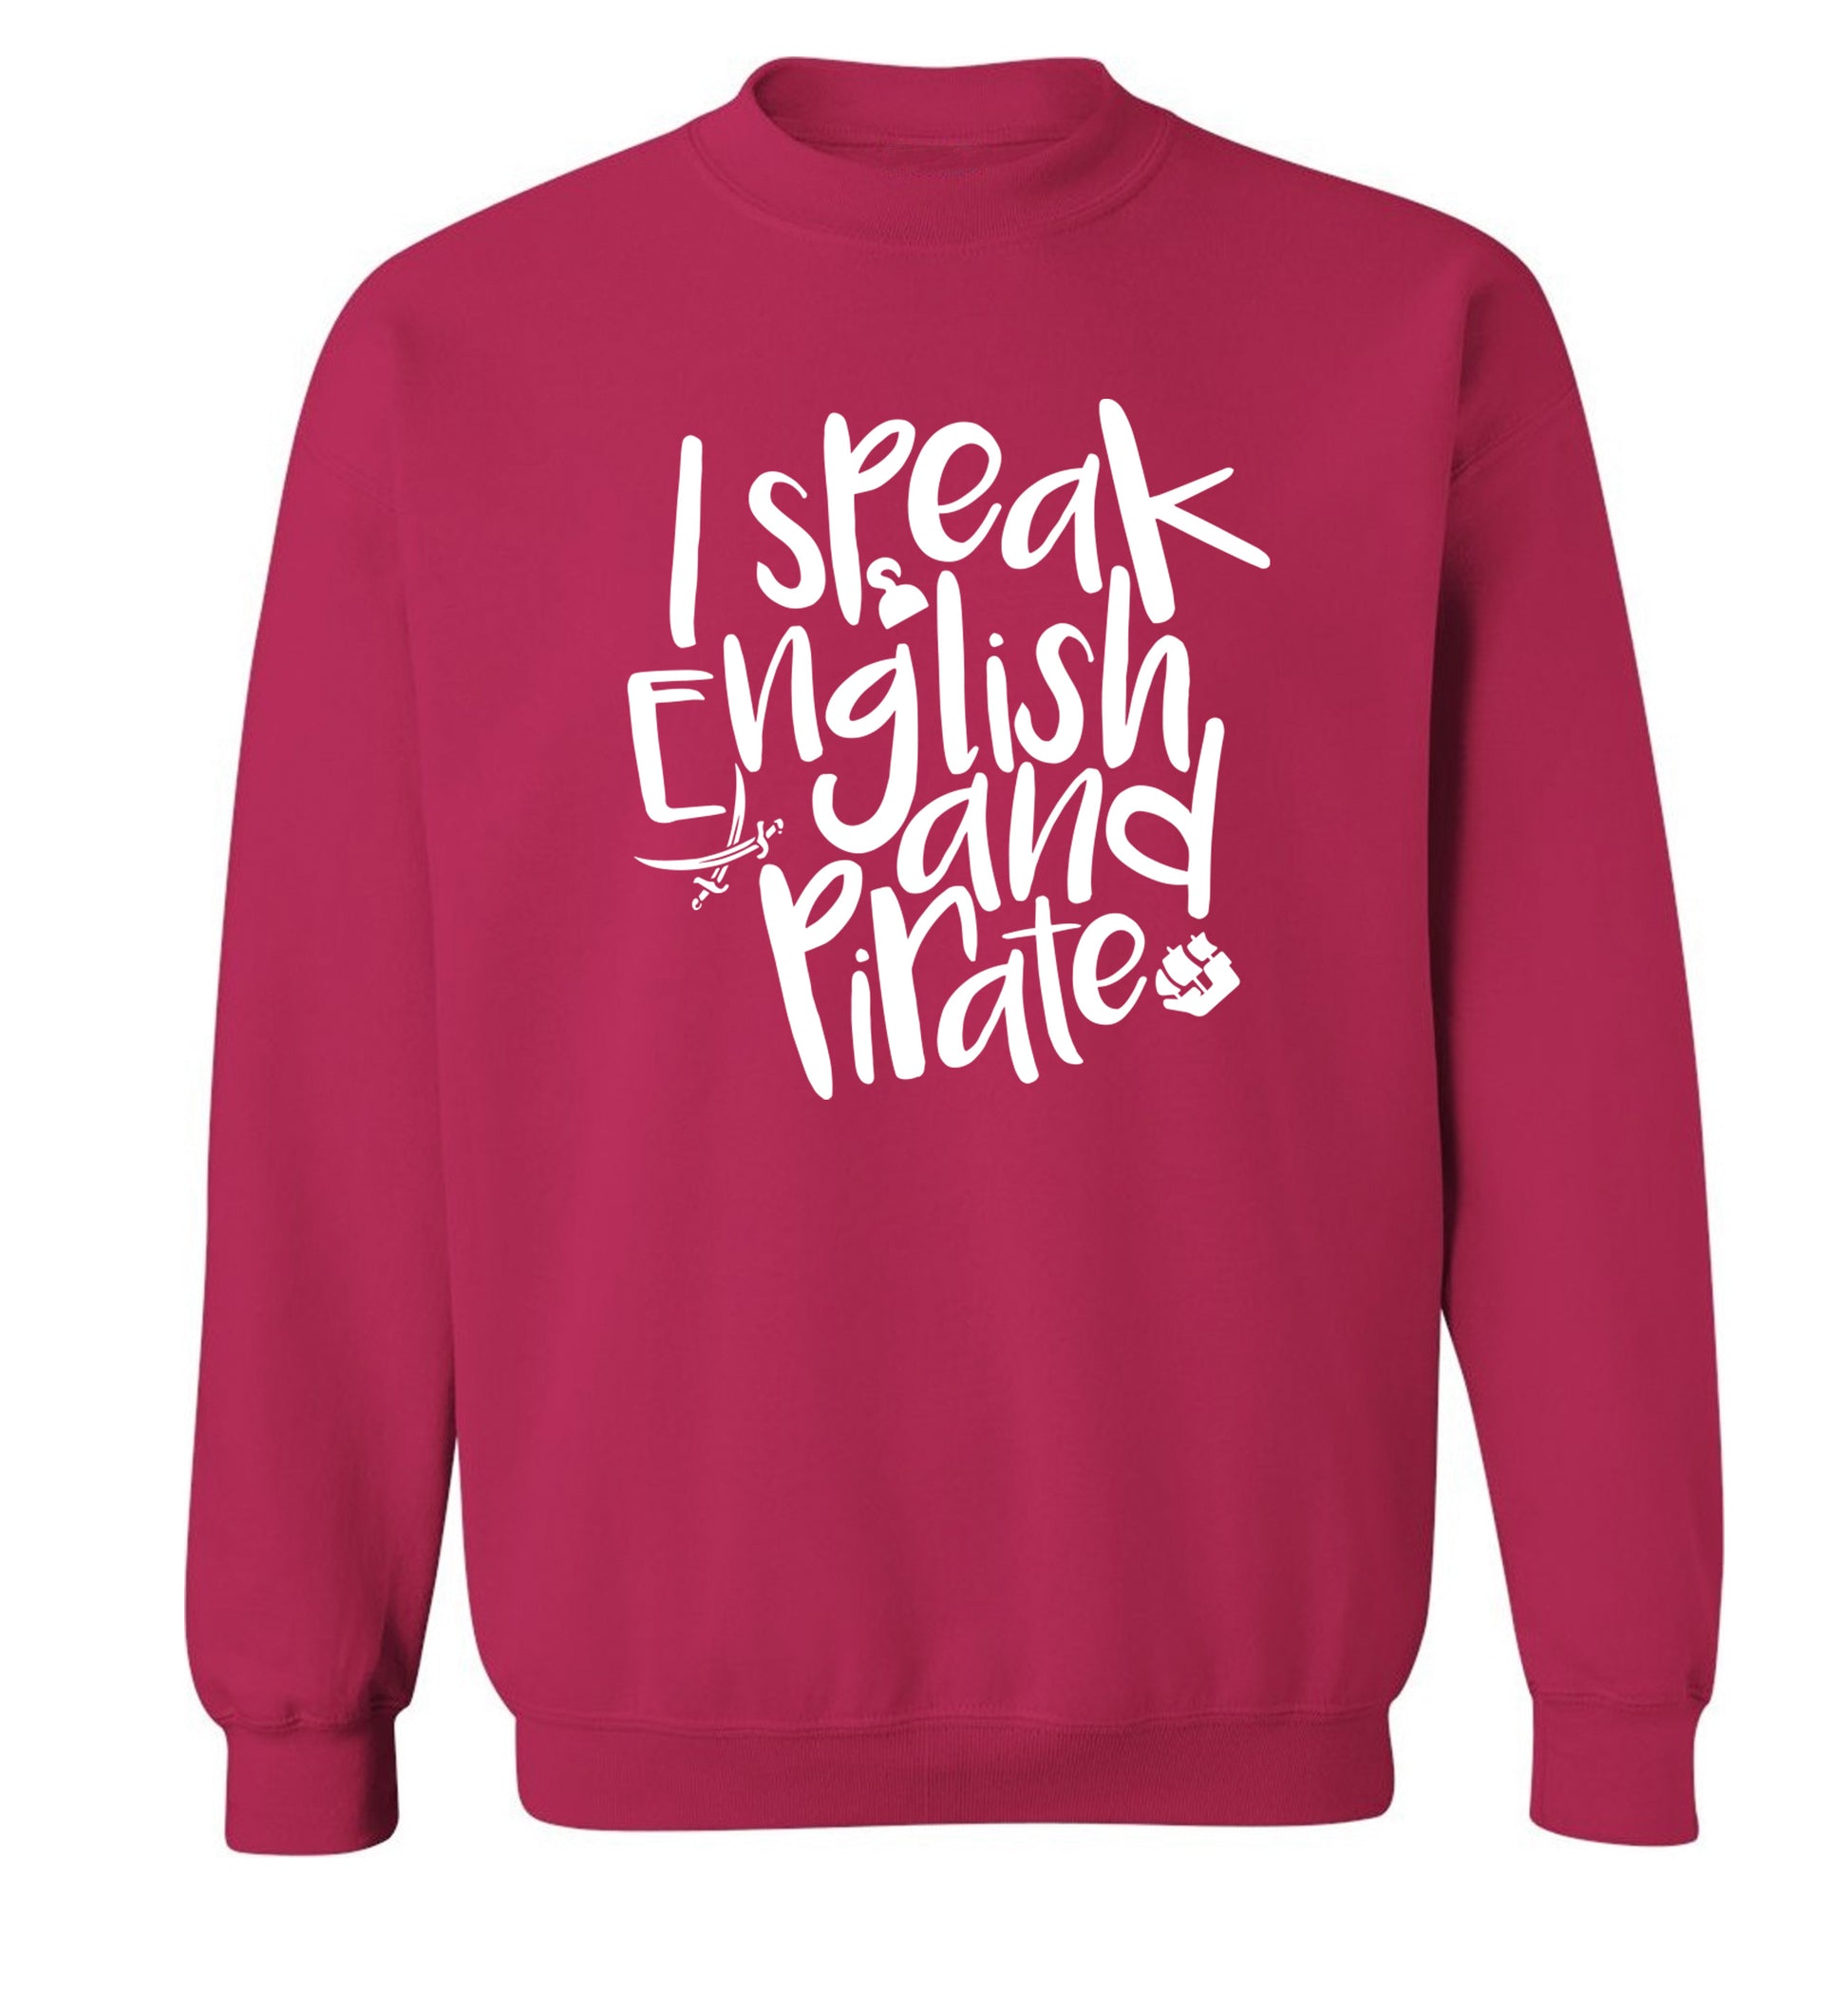 I speak English and pirate Adult's unisex pink Sweater 2XL